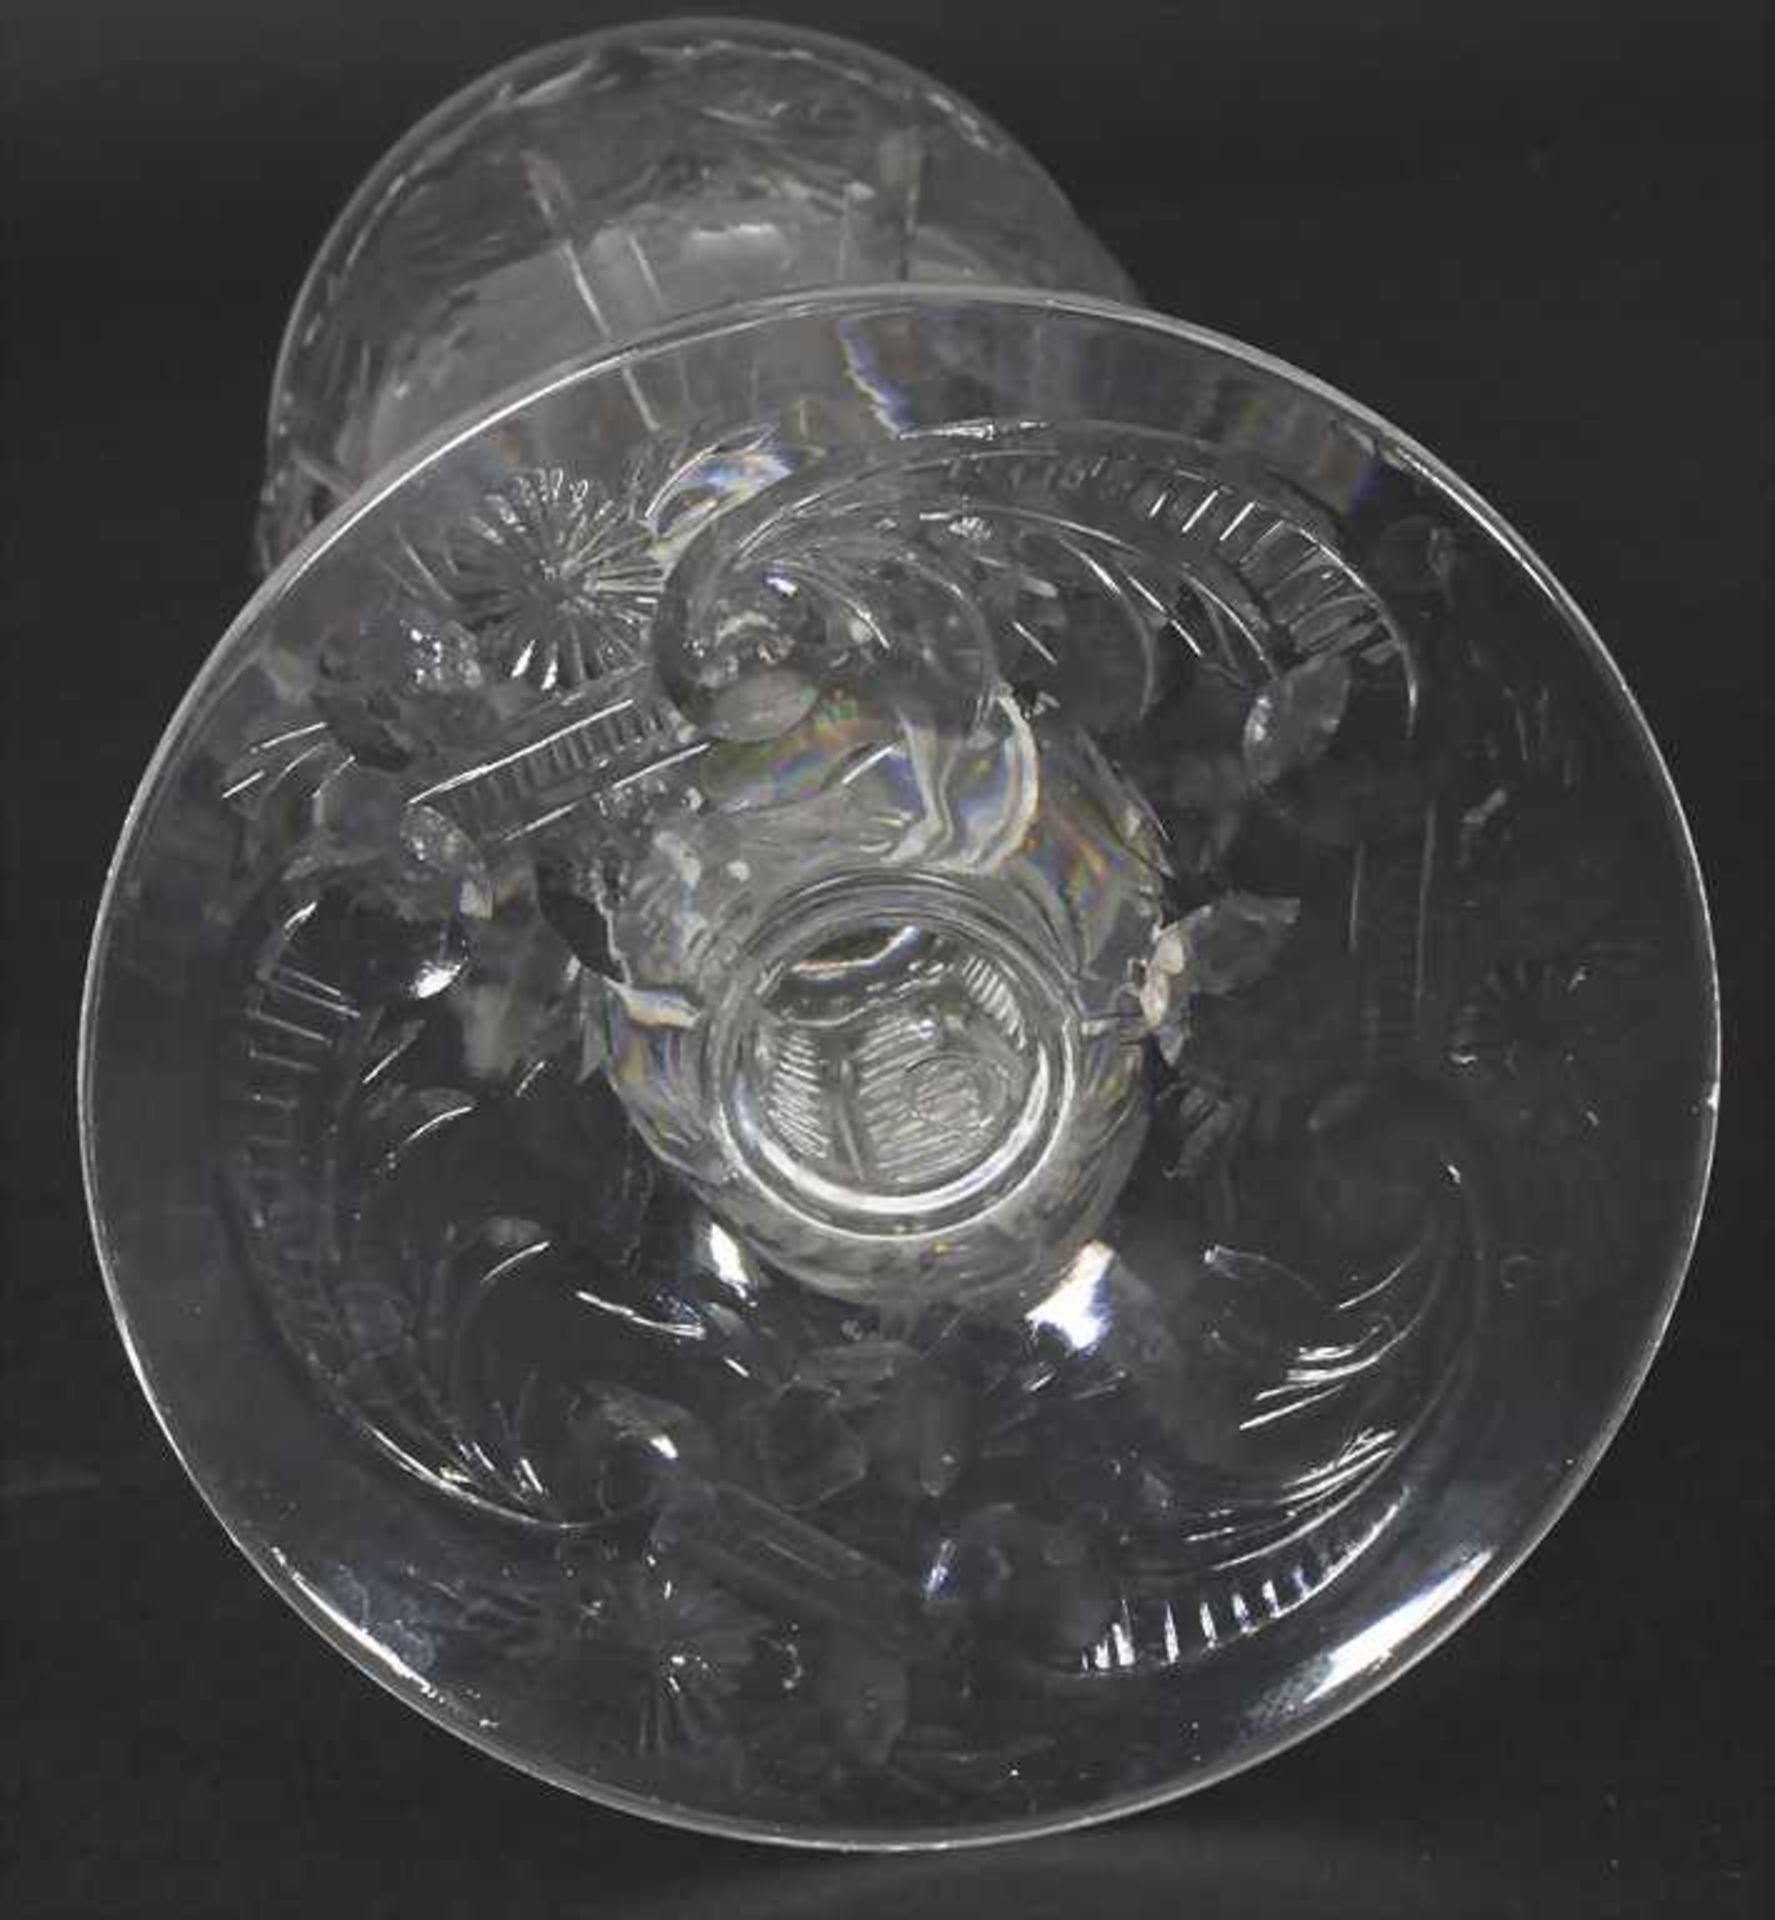 Weinglas / A wine glass, Frankreich, 19. Jh.Material: farbloses Glas, geschliffen,Höhe: 20,5 cm, - Image 3 of 6